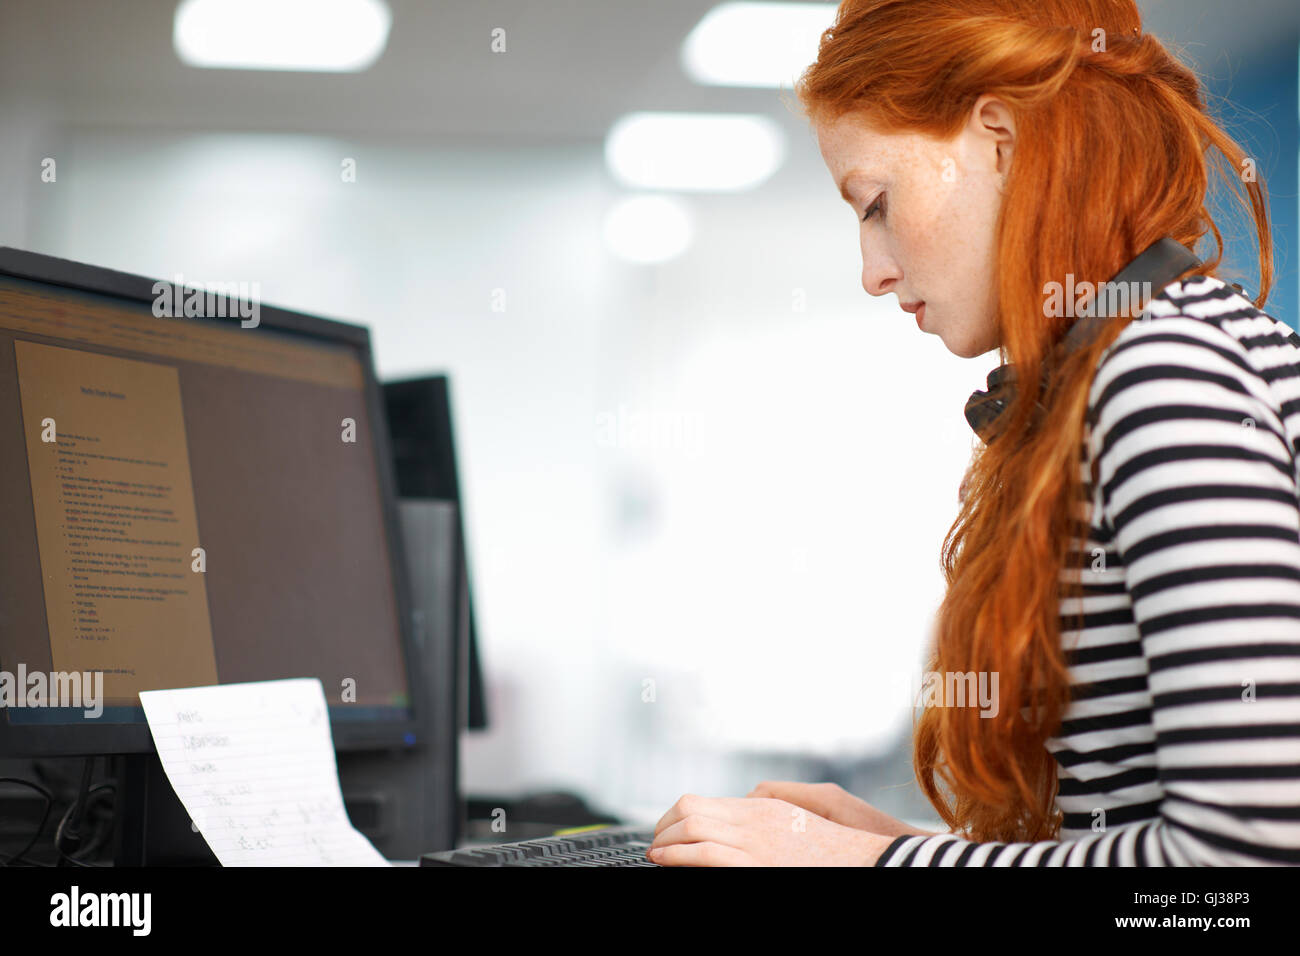 Young female college student typing at computer desk Stock Photo